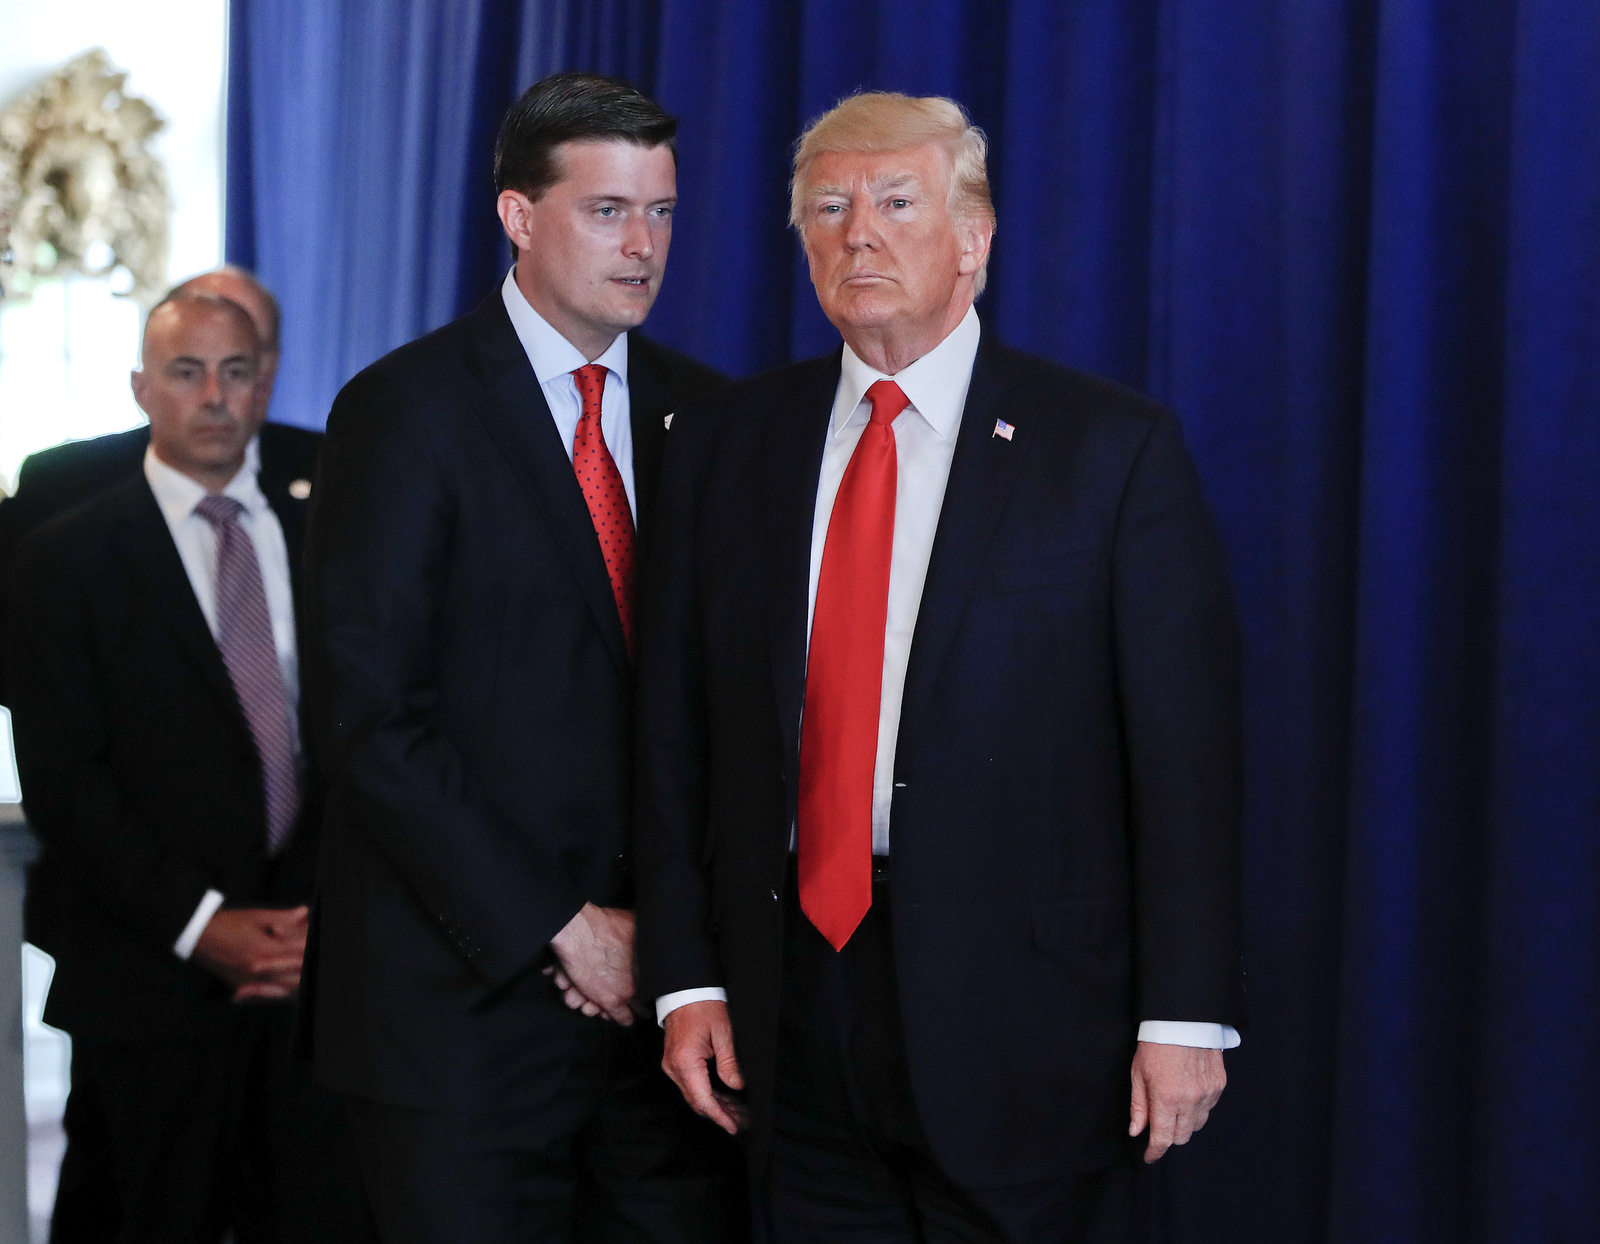 Rob Porter, left, speaks to Donald Trump after he made remarks regarding the on going situation in Charlottesville, Va., Aug. 12, 2017 at Trump National Golf Club in Bedminister, N.J. (AP/Pablo Martinez Monsivais)